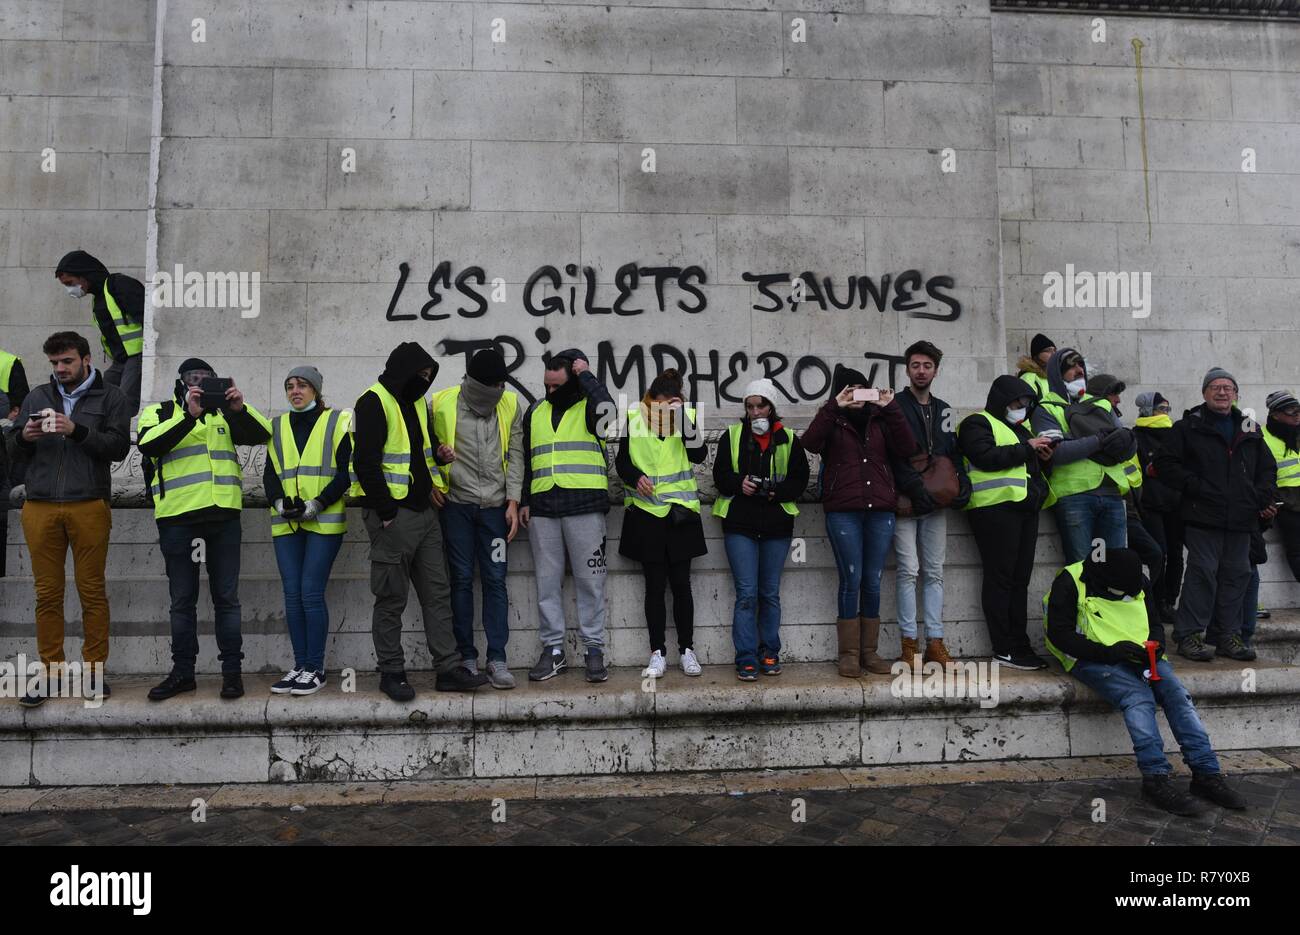 December 01, 2018 - Paris, France: Yellow vest protesters gather near the  Arc of Triumph at the westernmost part of the Champs-Elysees avenue. They  clashed with police after authorities set up a